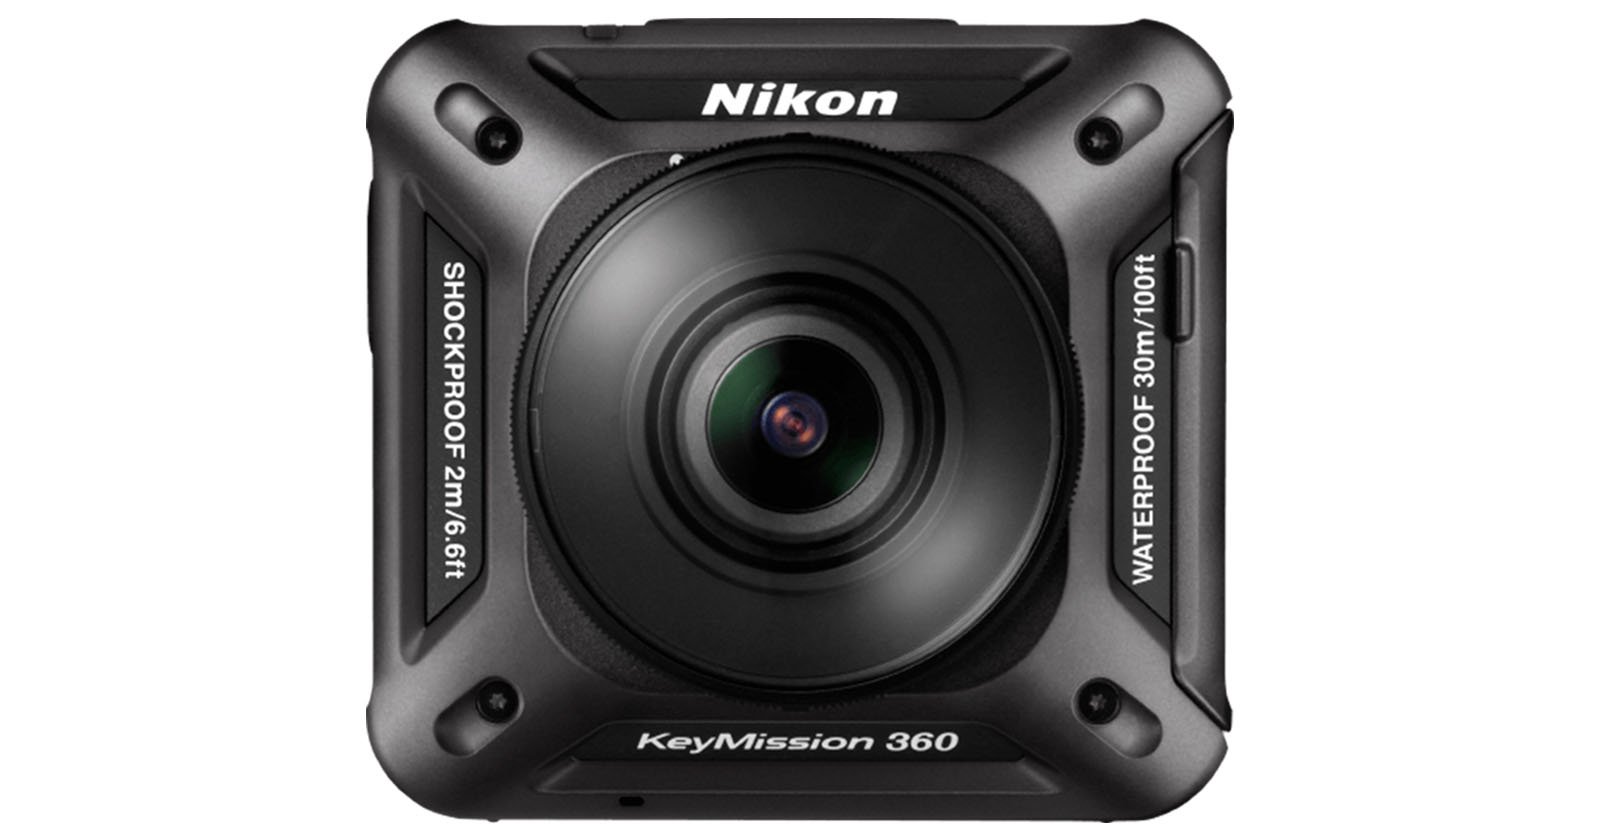 Front view of a Nikon KeyMission 360 camera, featuring a prominent lens centered on a black square body with labels indicating shockproof and waterproof qualities.